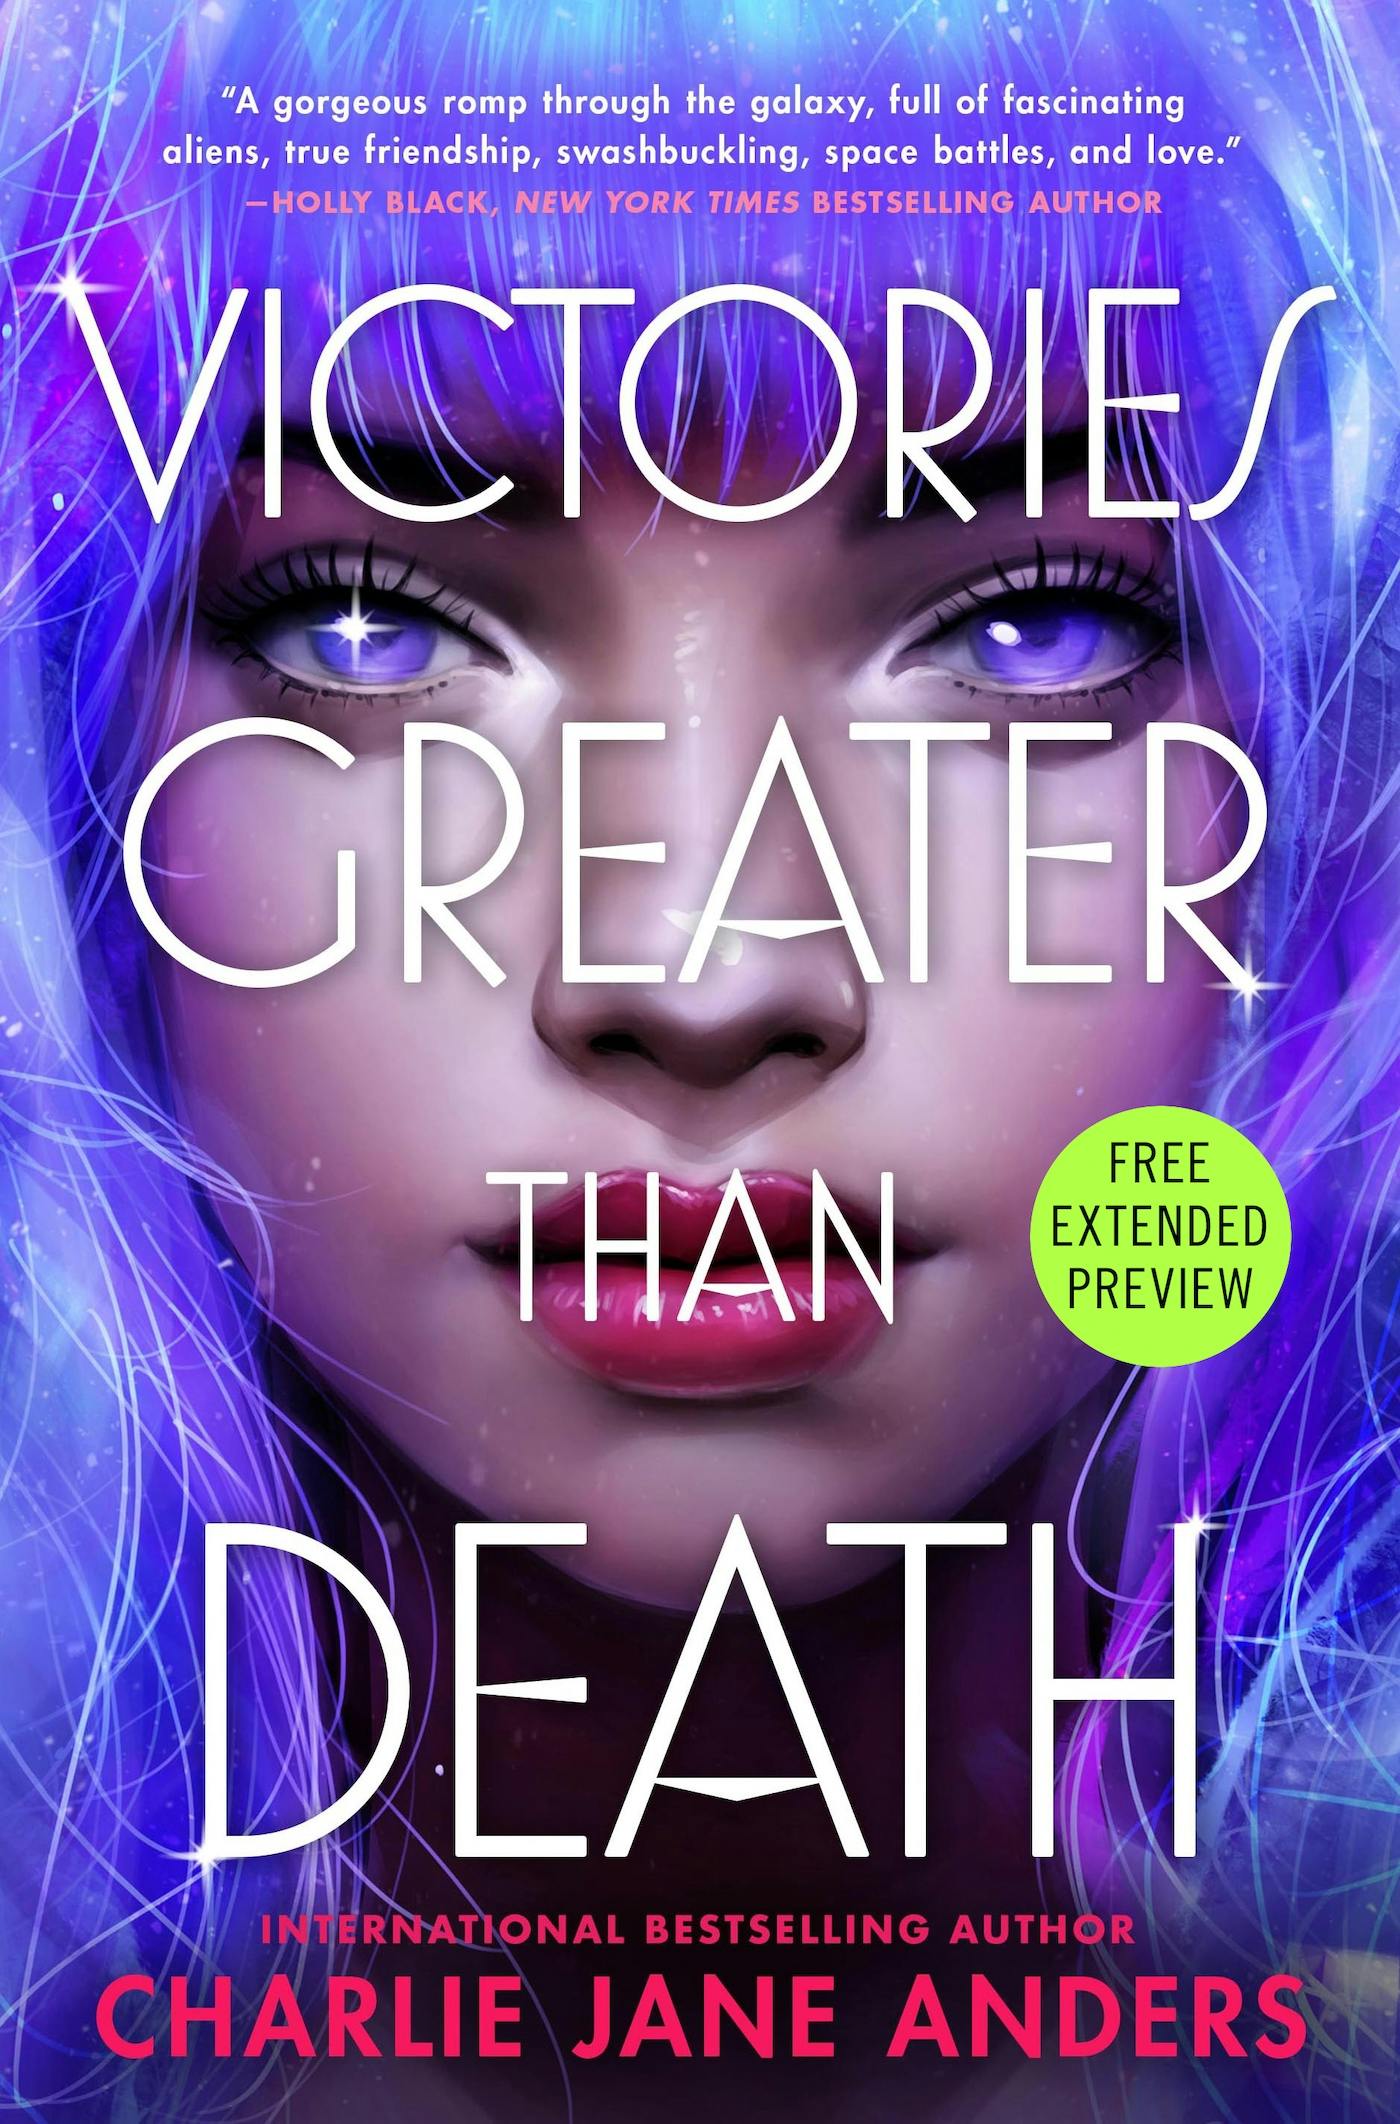 Cover for the book titled as: Victories Greater than Death Sneak Peek